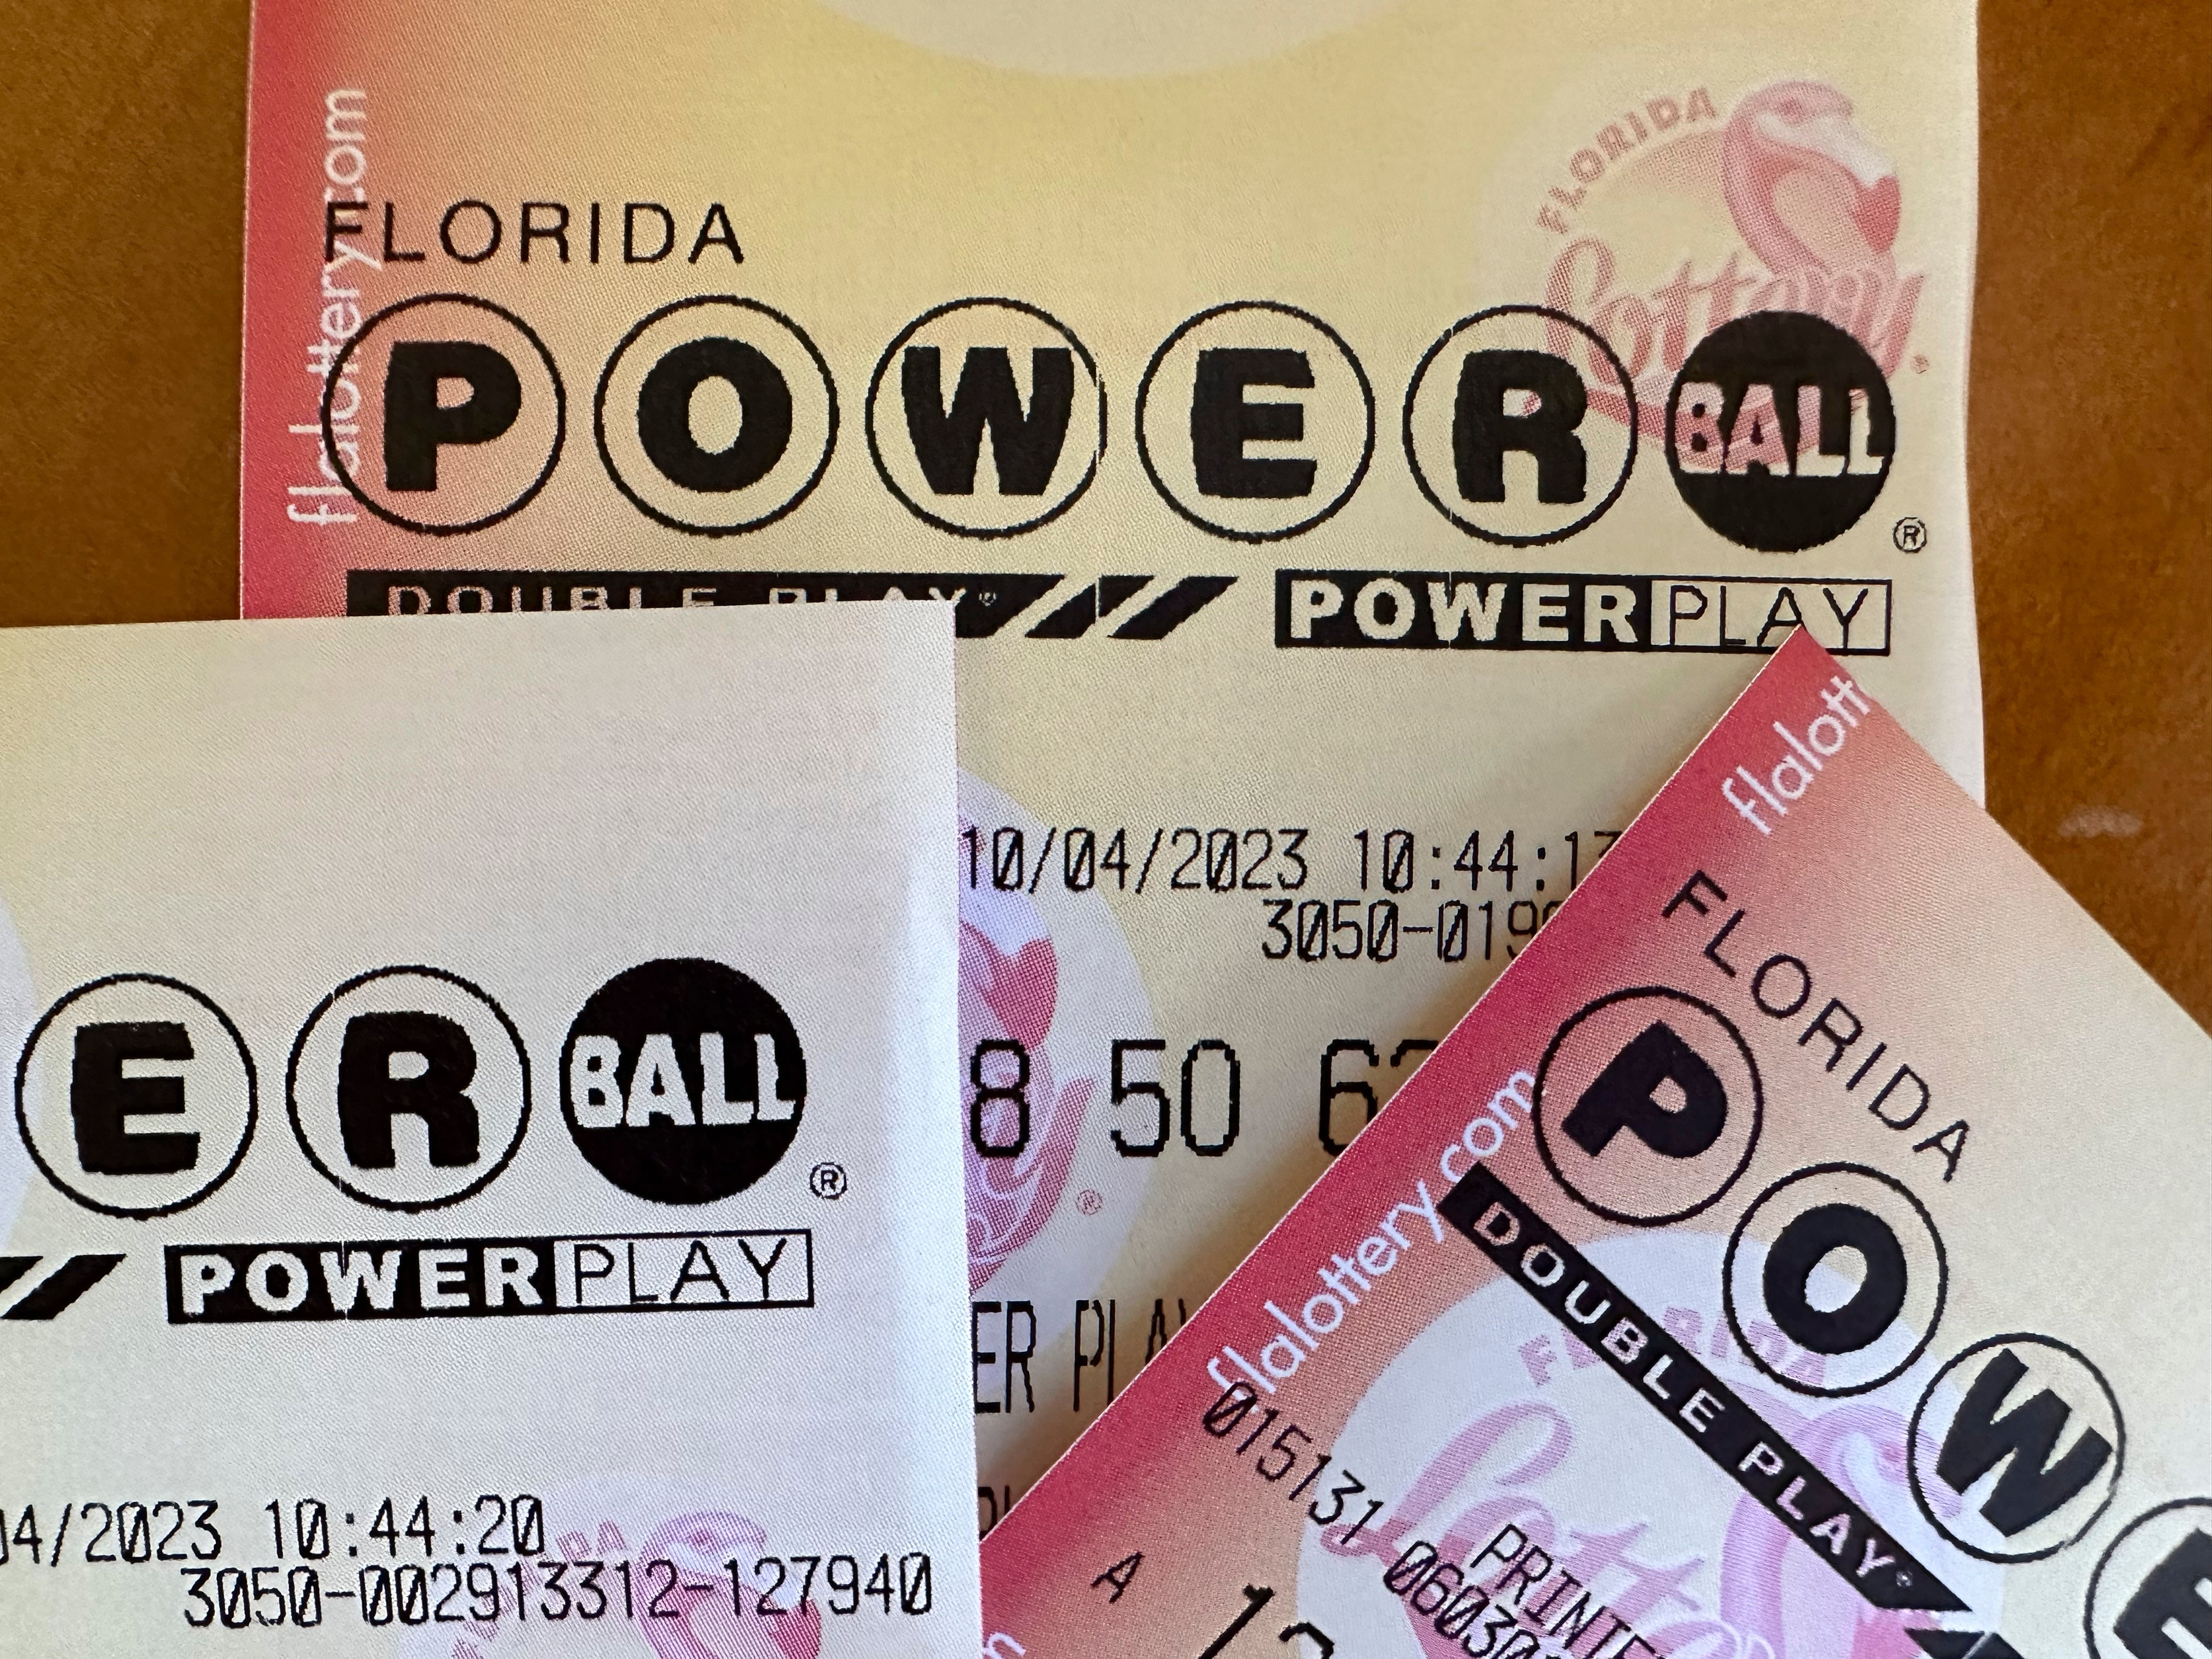 Powerball lottery tickets are displayed 4 October 2023, in Surfside, Florida